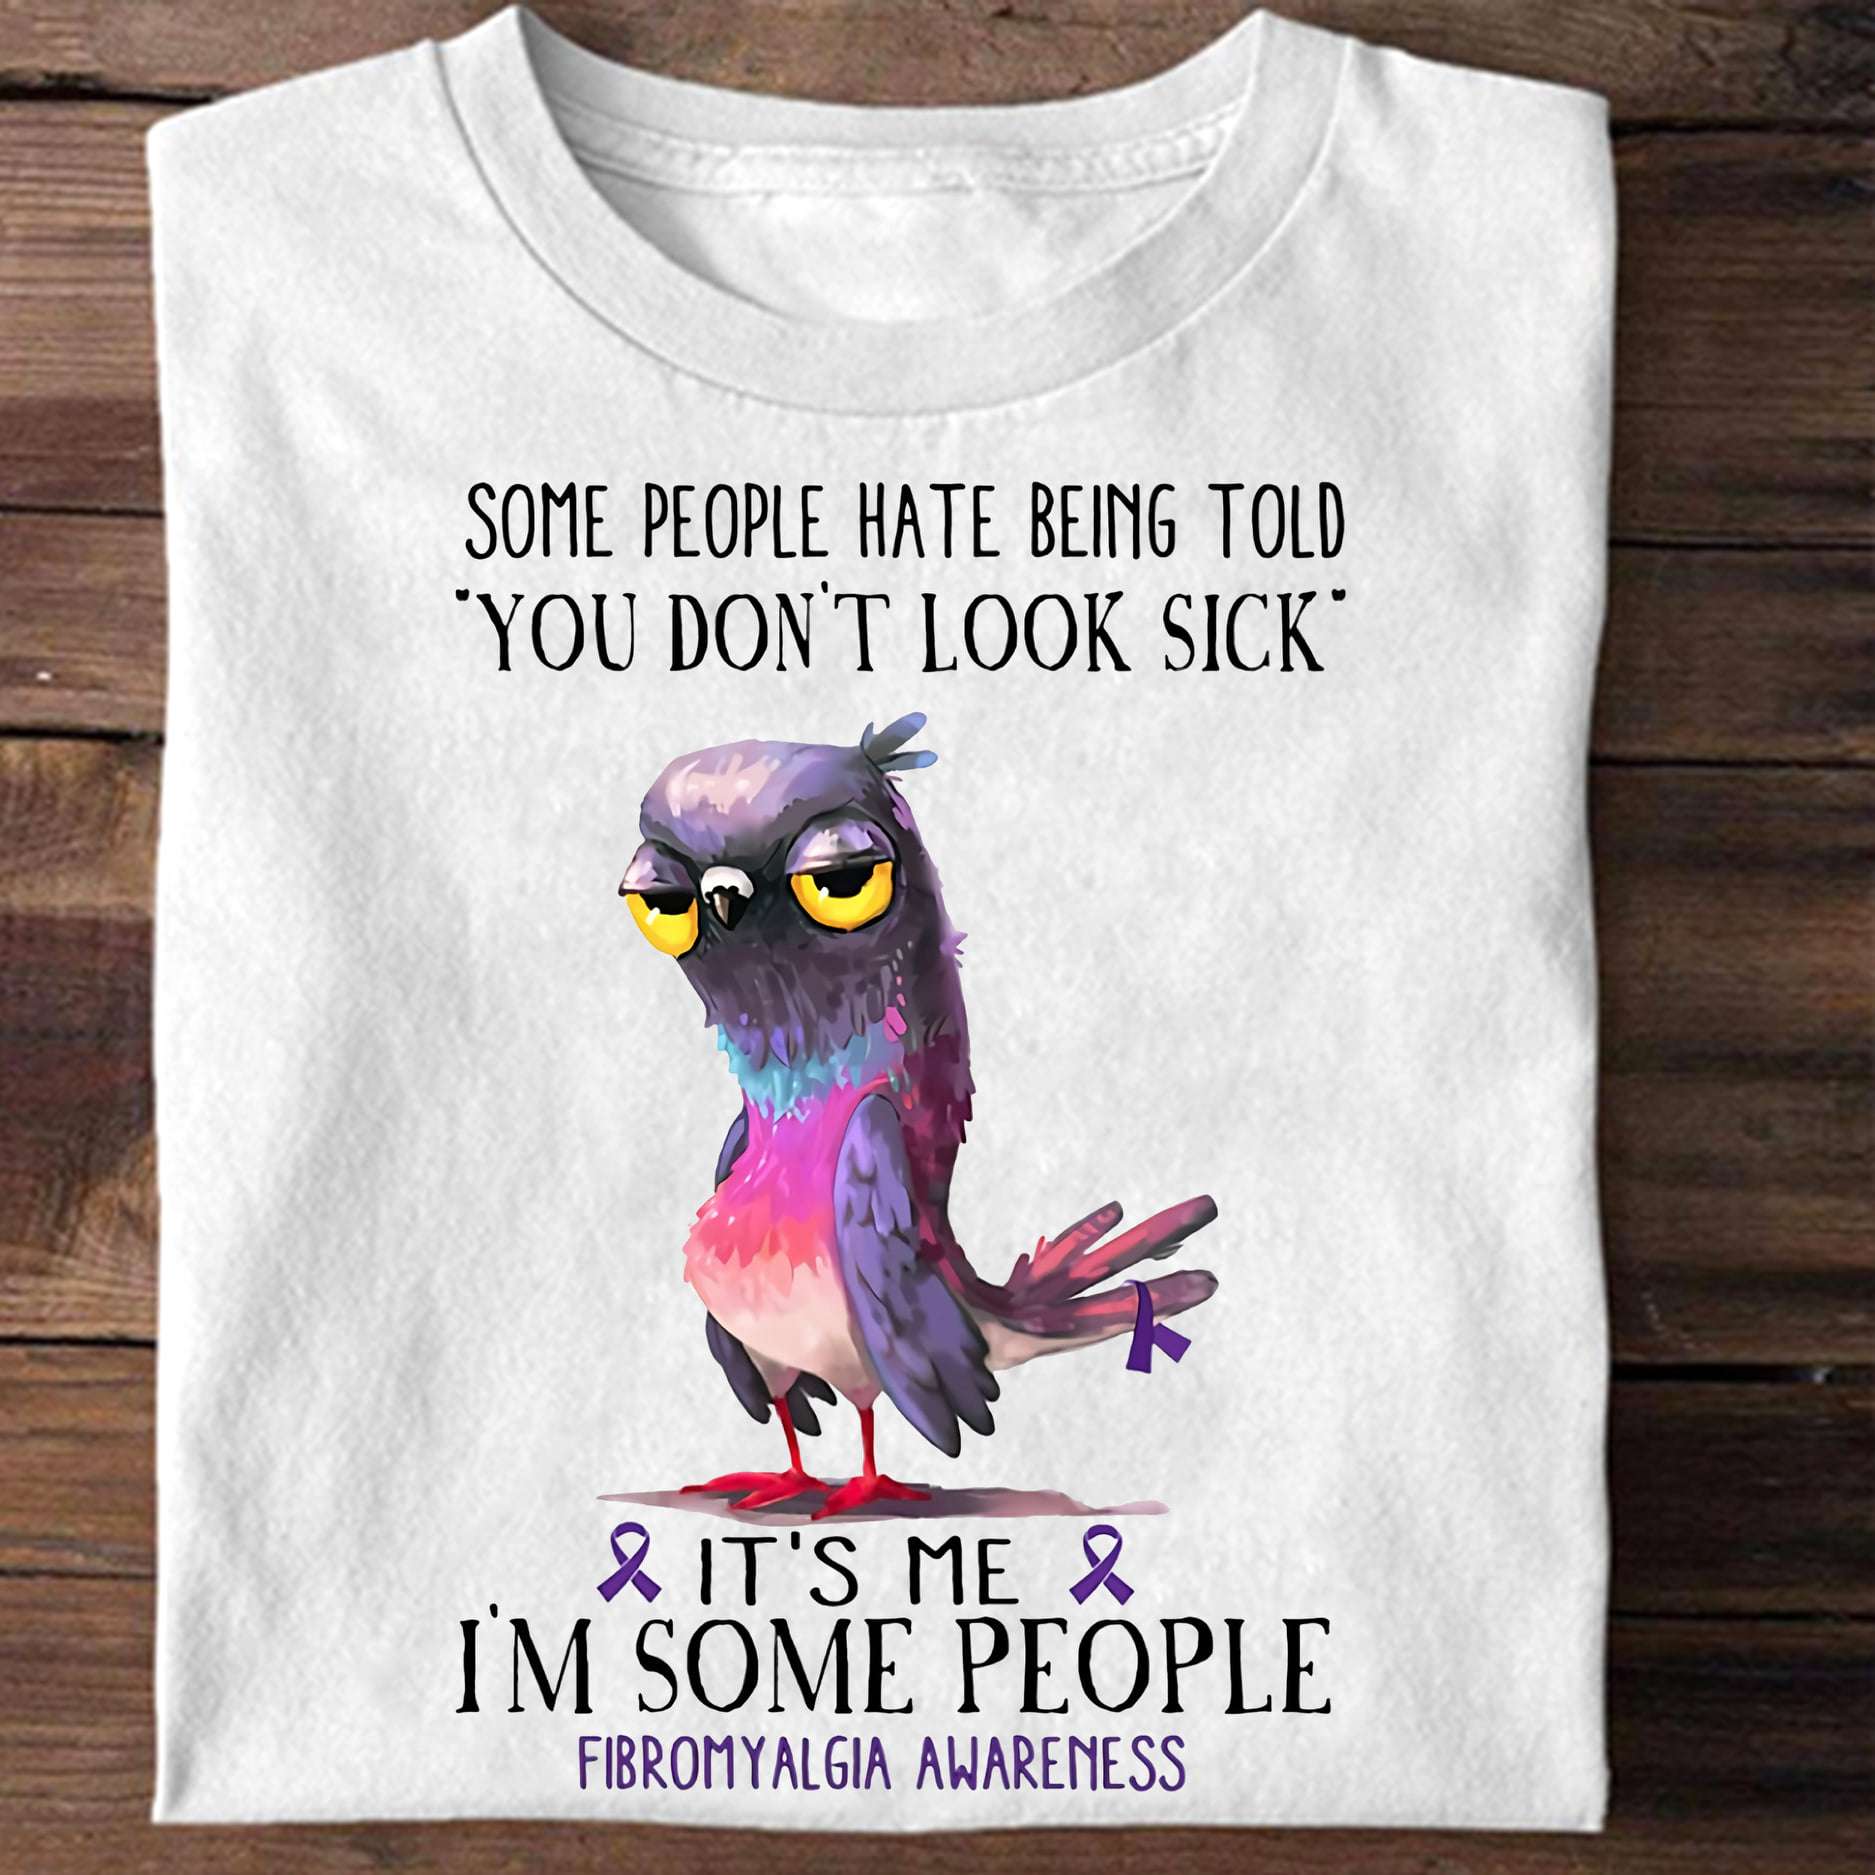 Some people hate being told you don't look sick - Tired bird, Fibromyalgia awareness